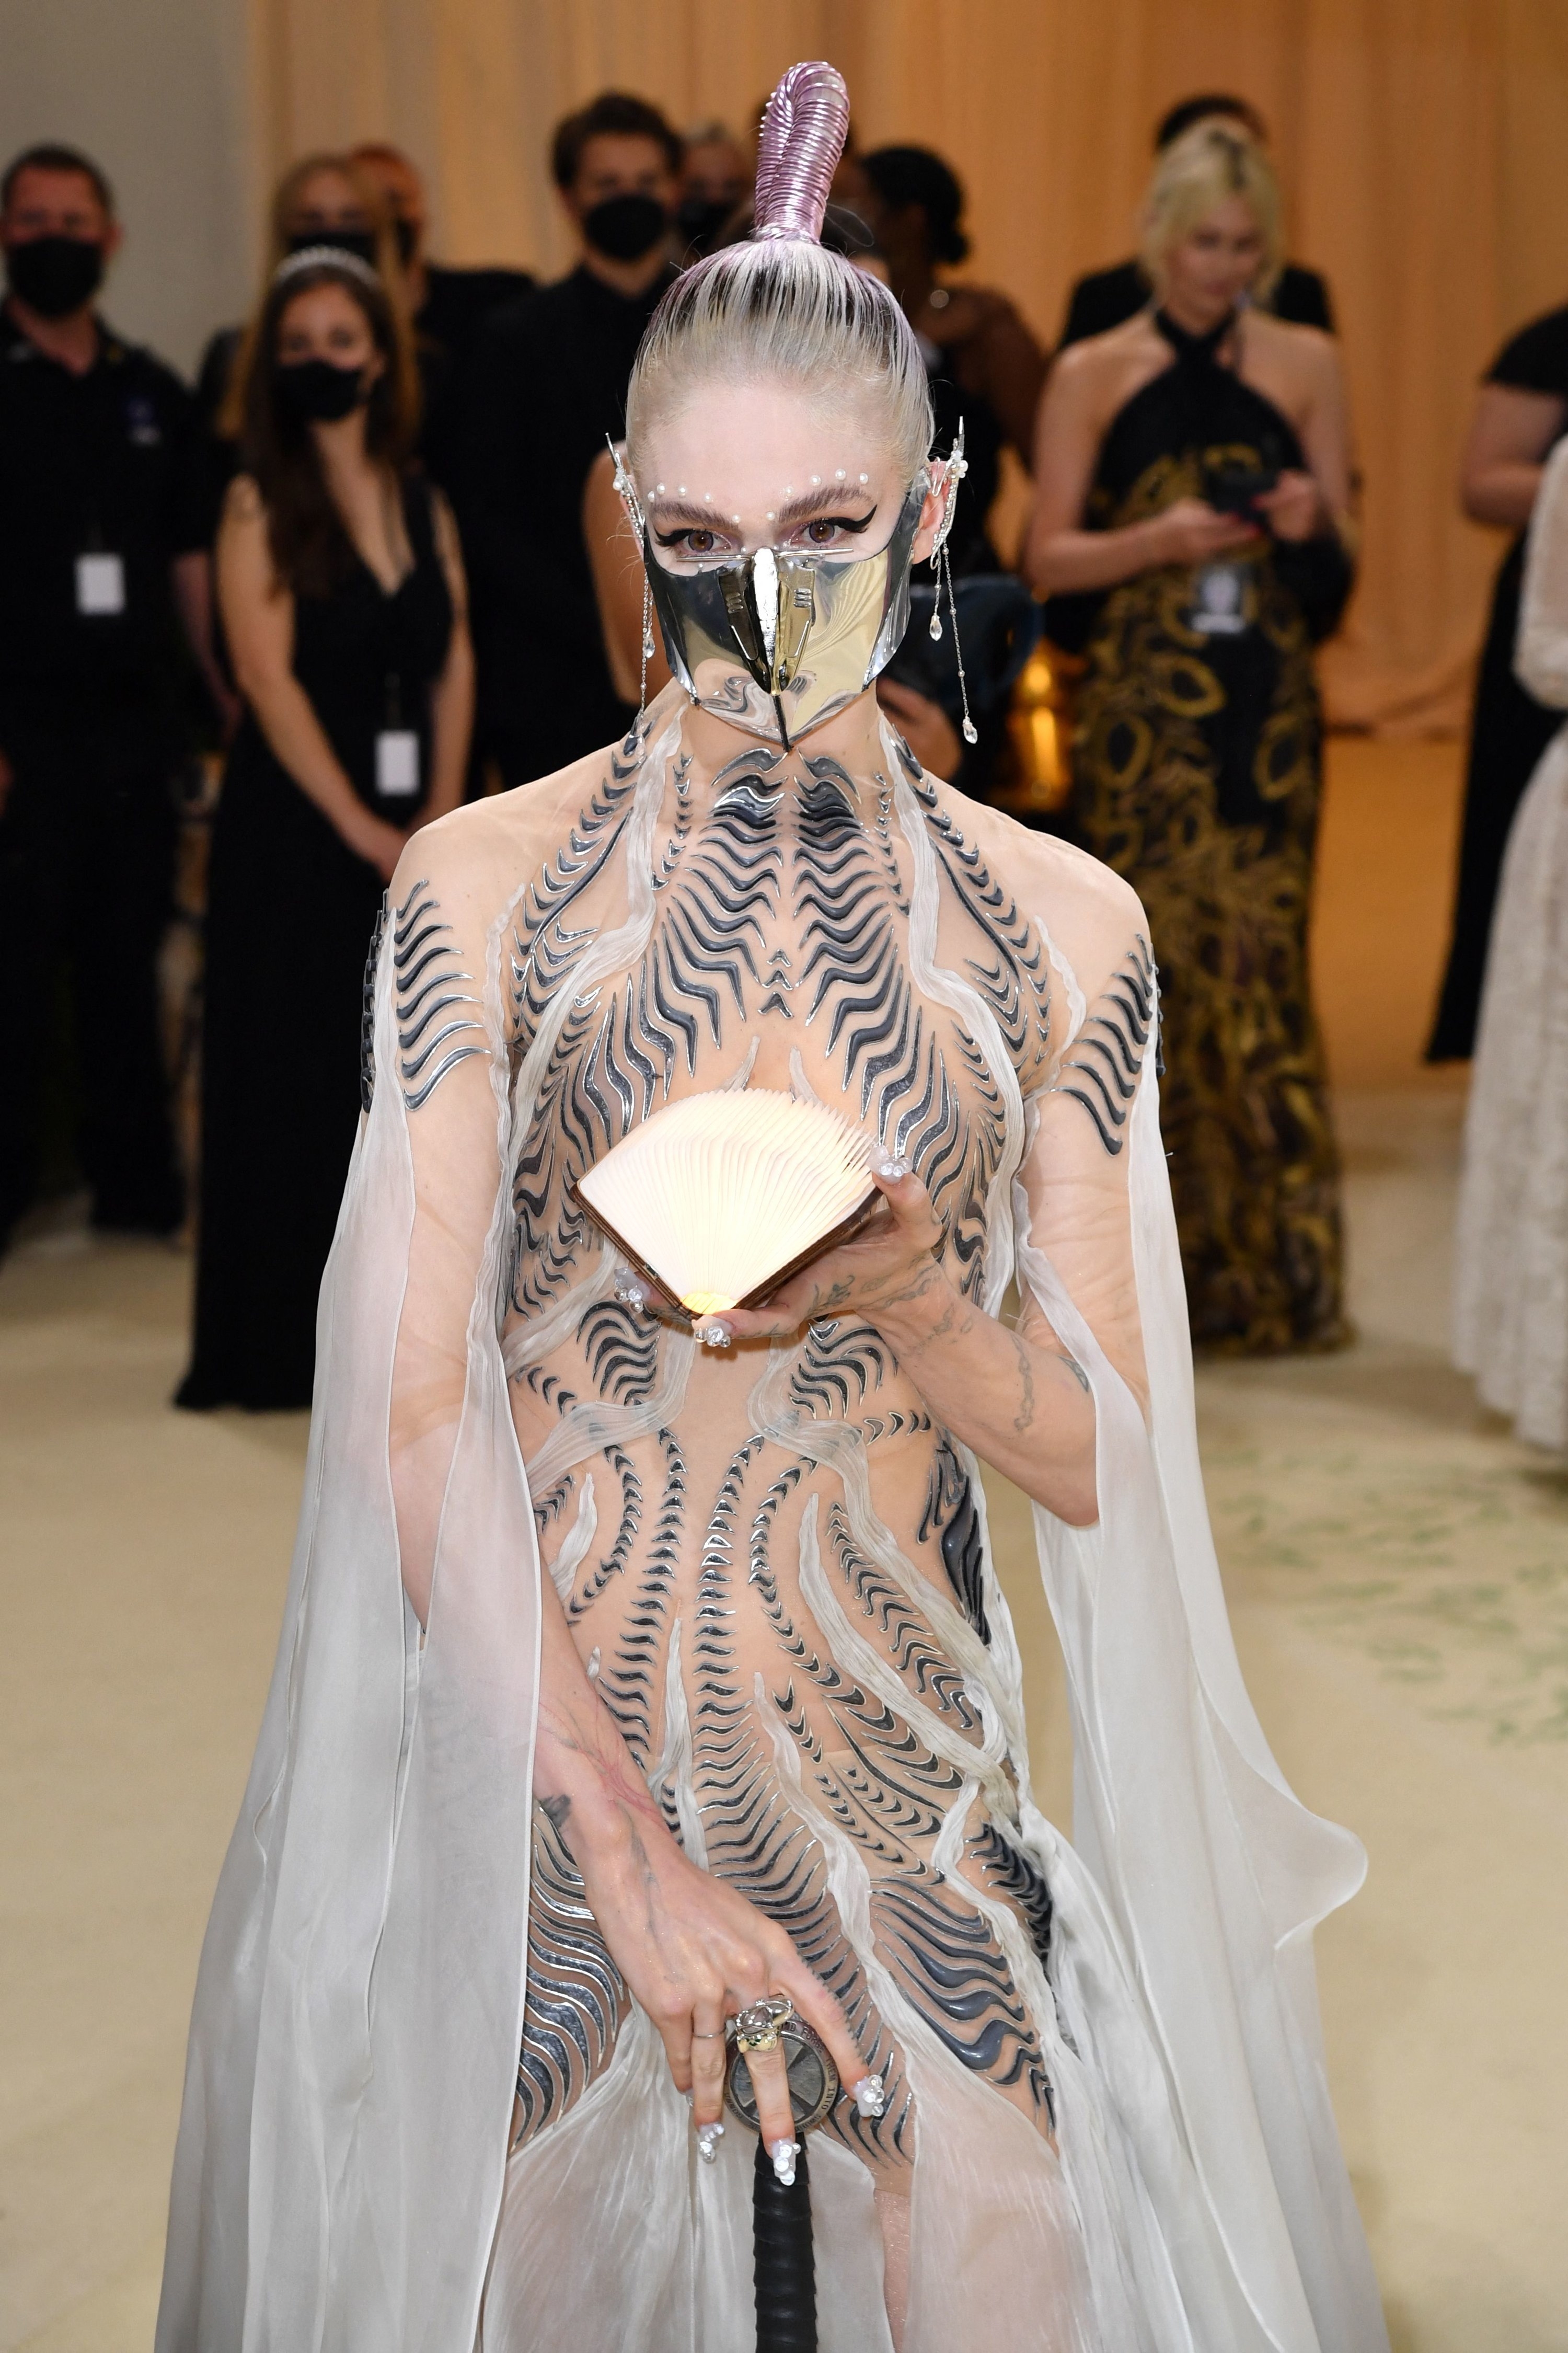 Grimes holds an open book on the carpet